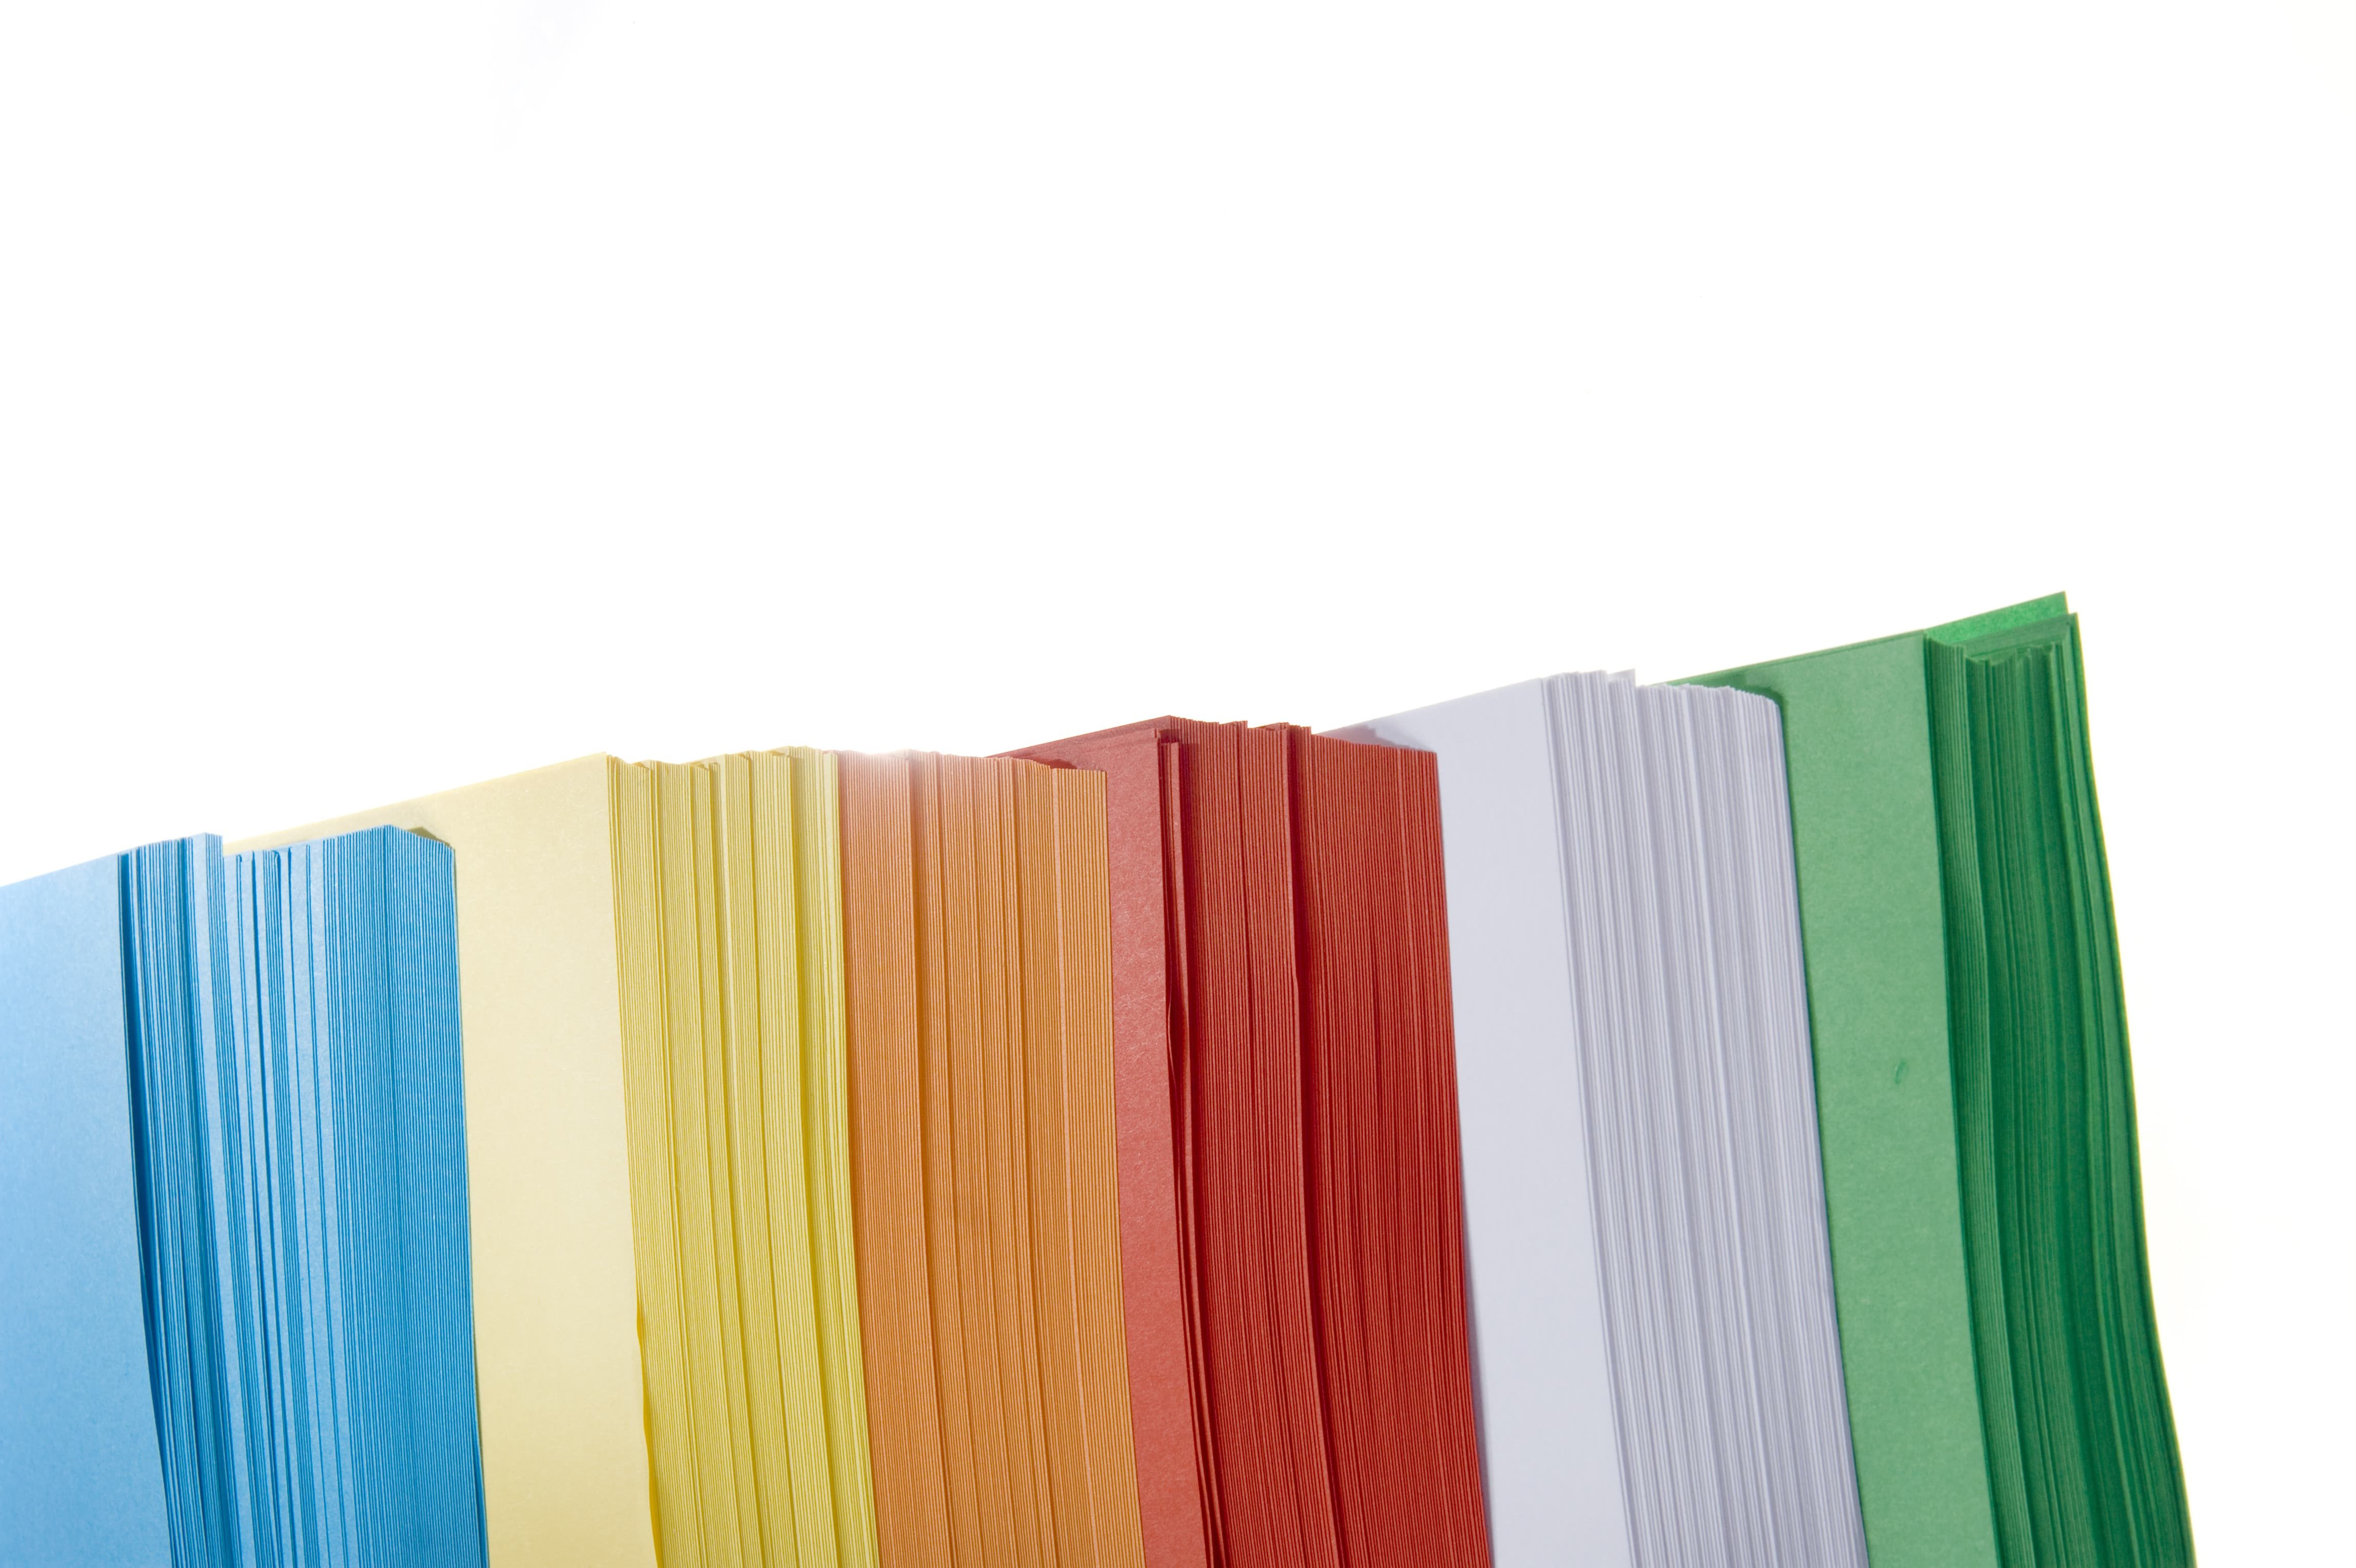 Choosing The Right Paper Stock for your Project